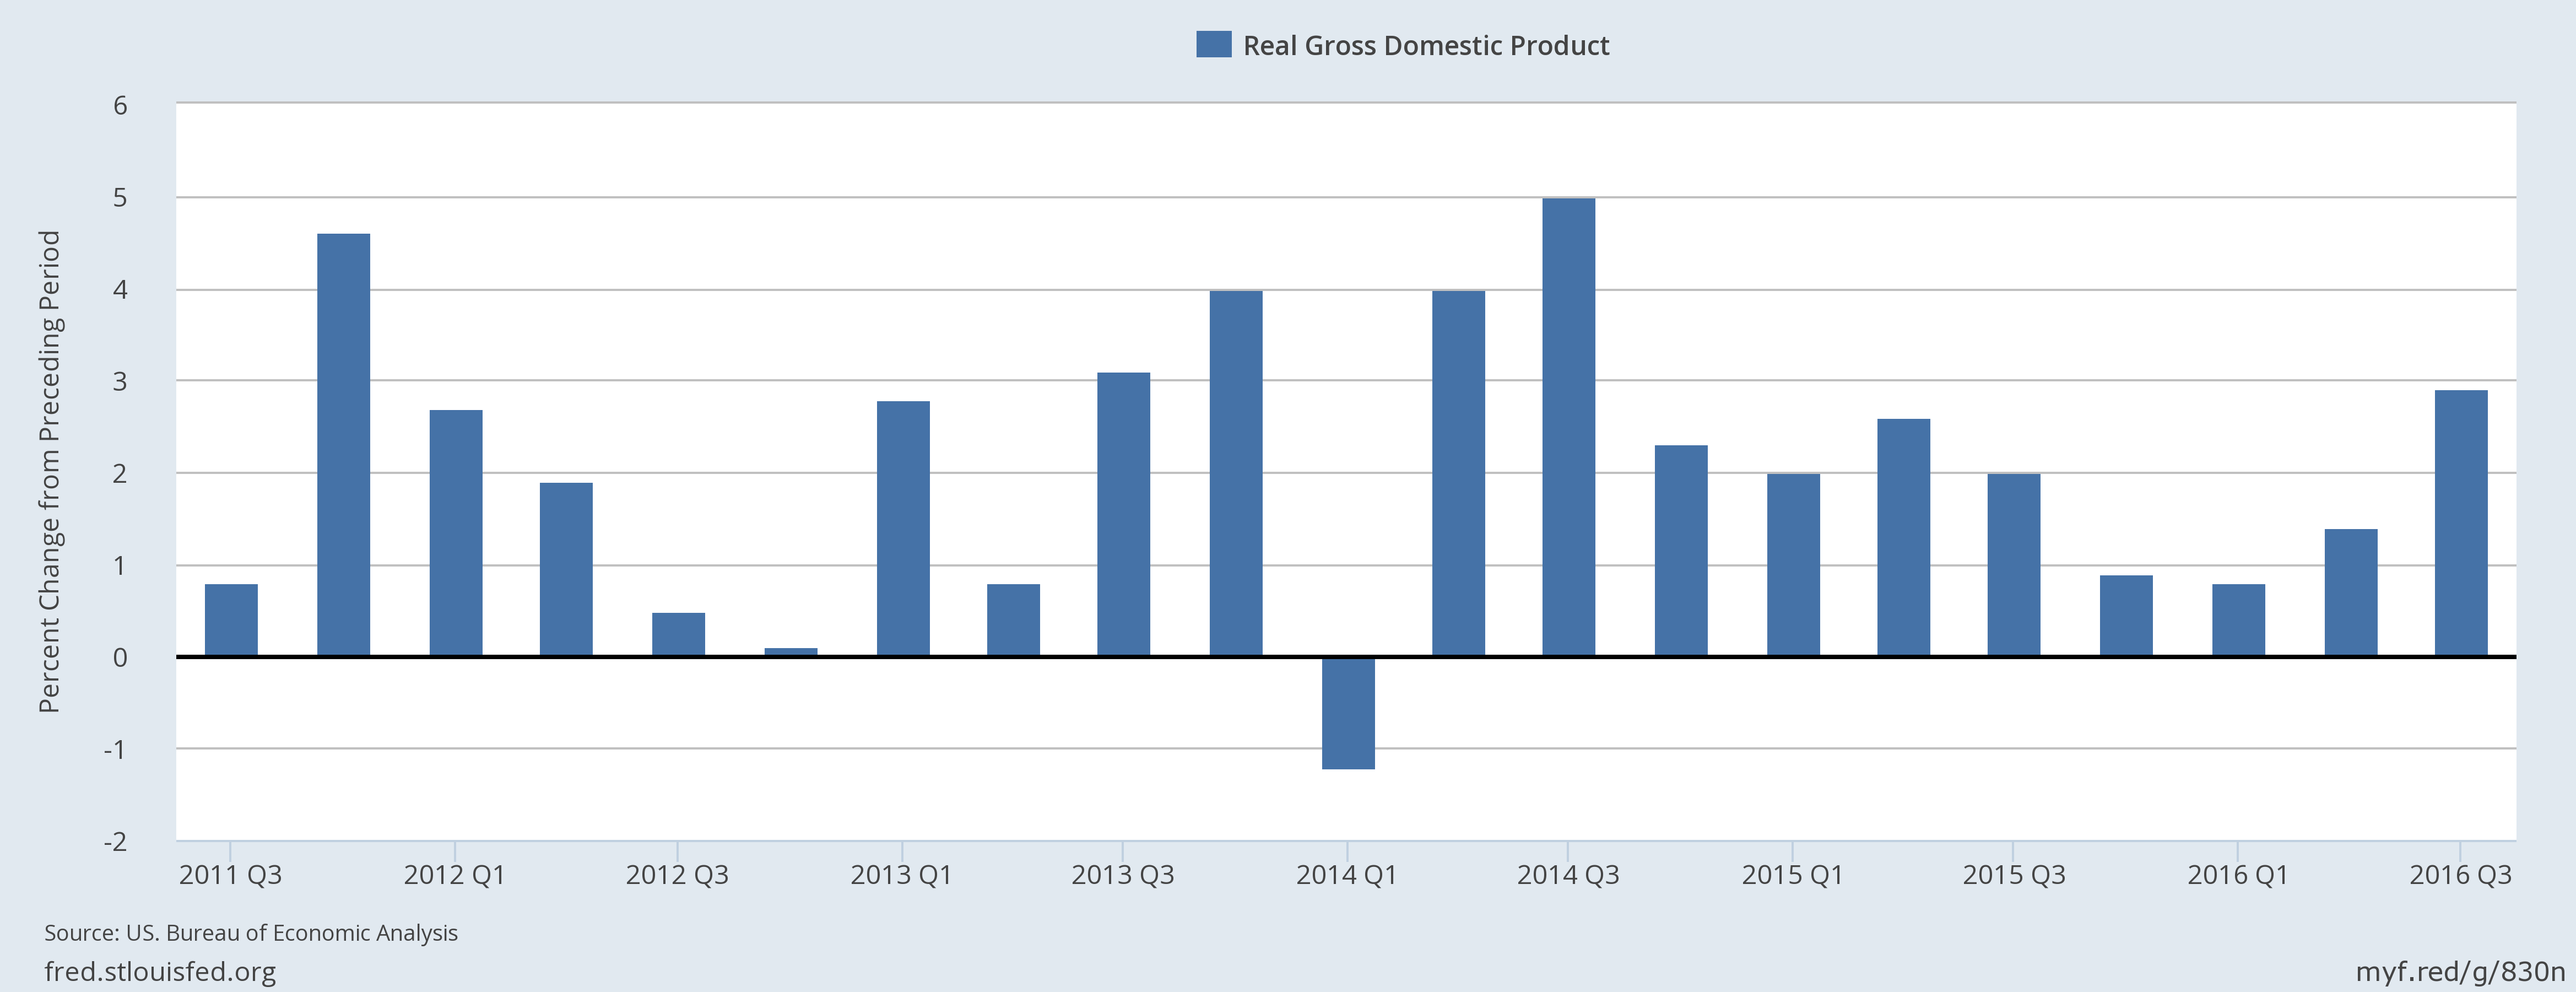 Real GDP in Q3 2011-2016